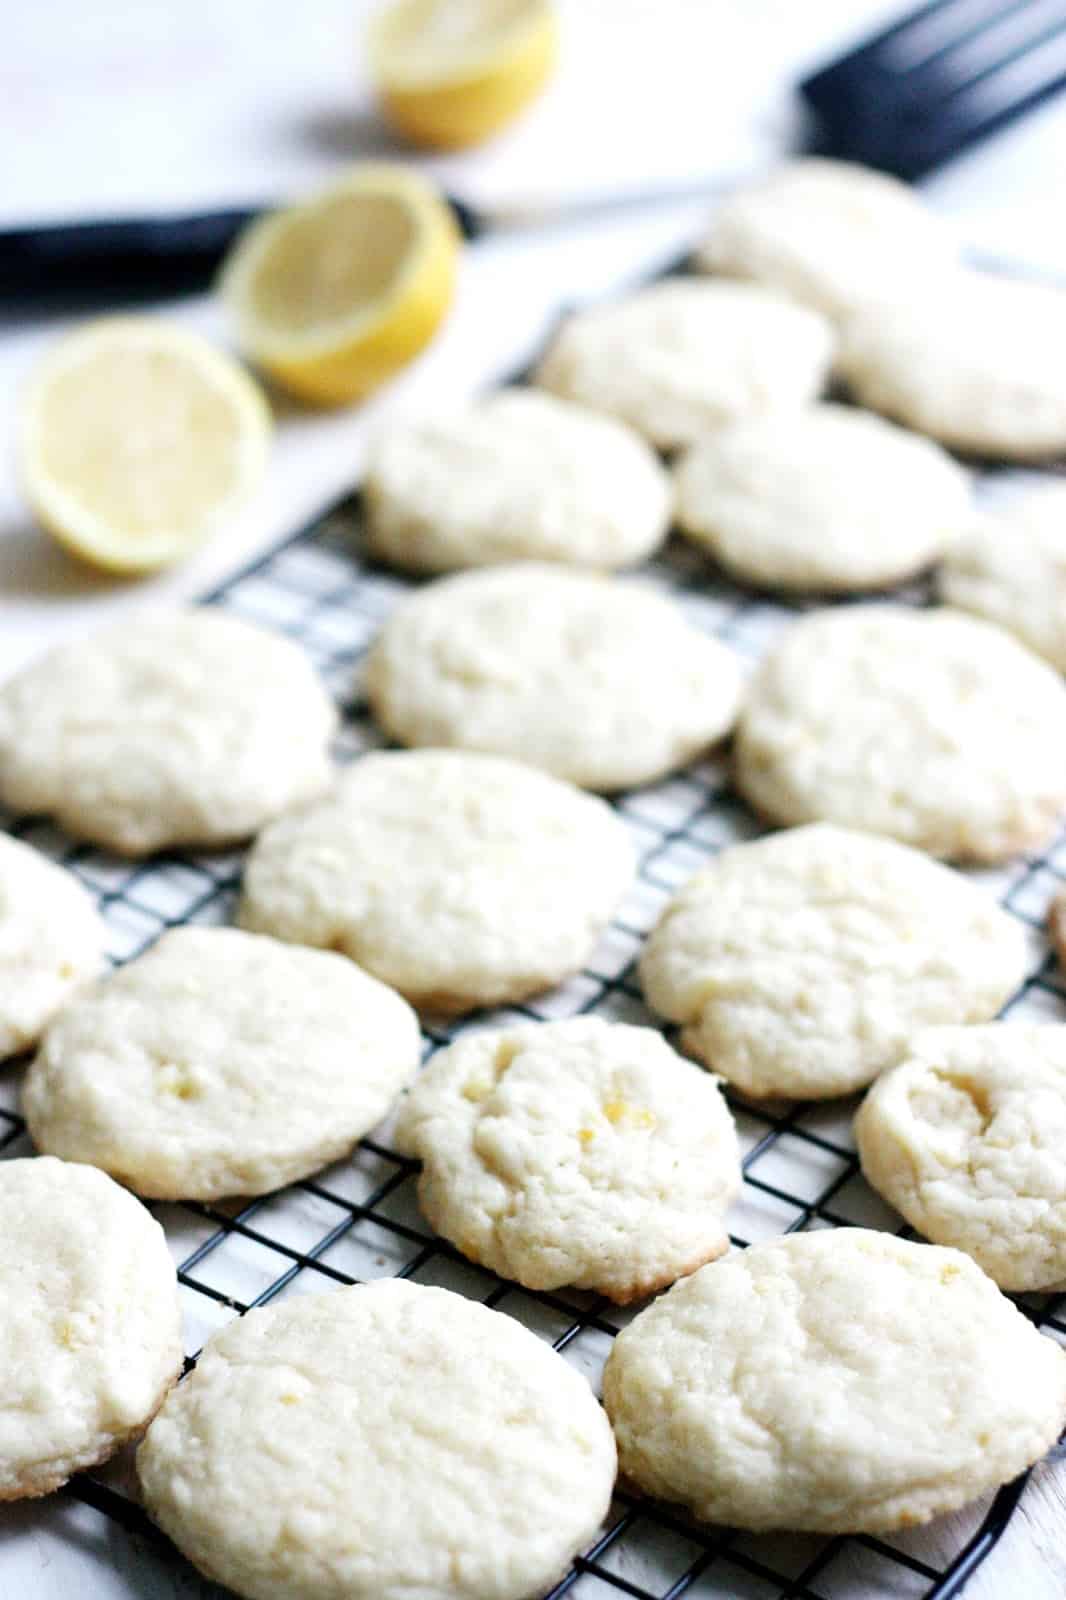 Lemon cookies cooling on a wire rack